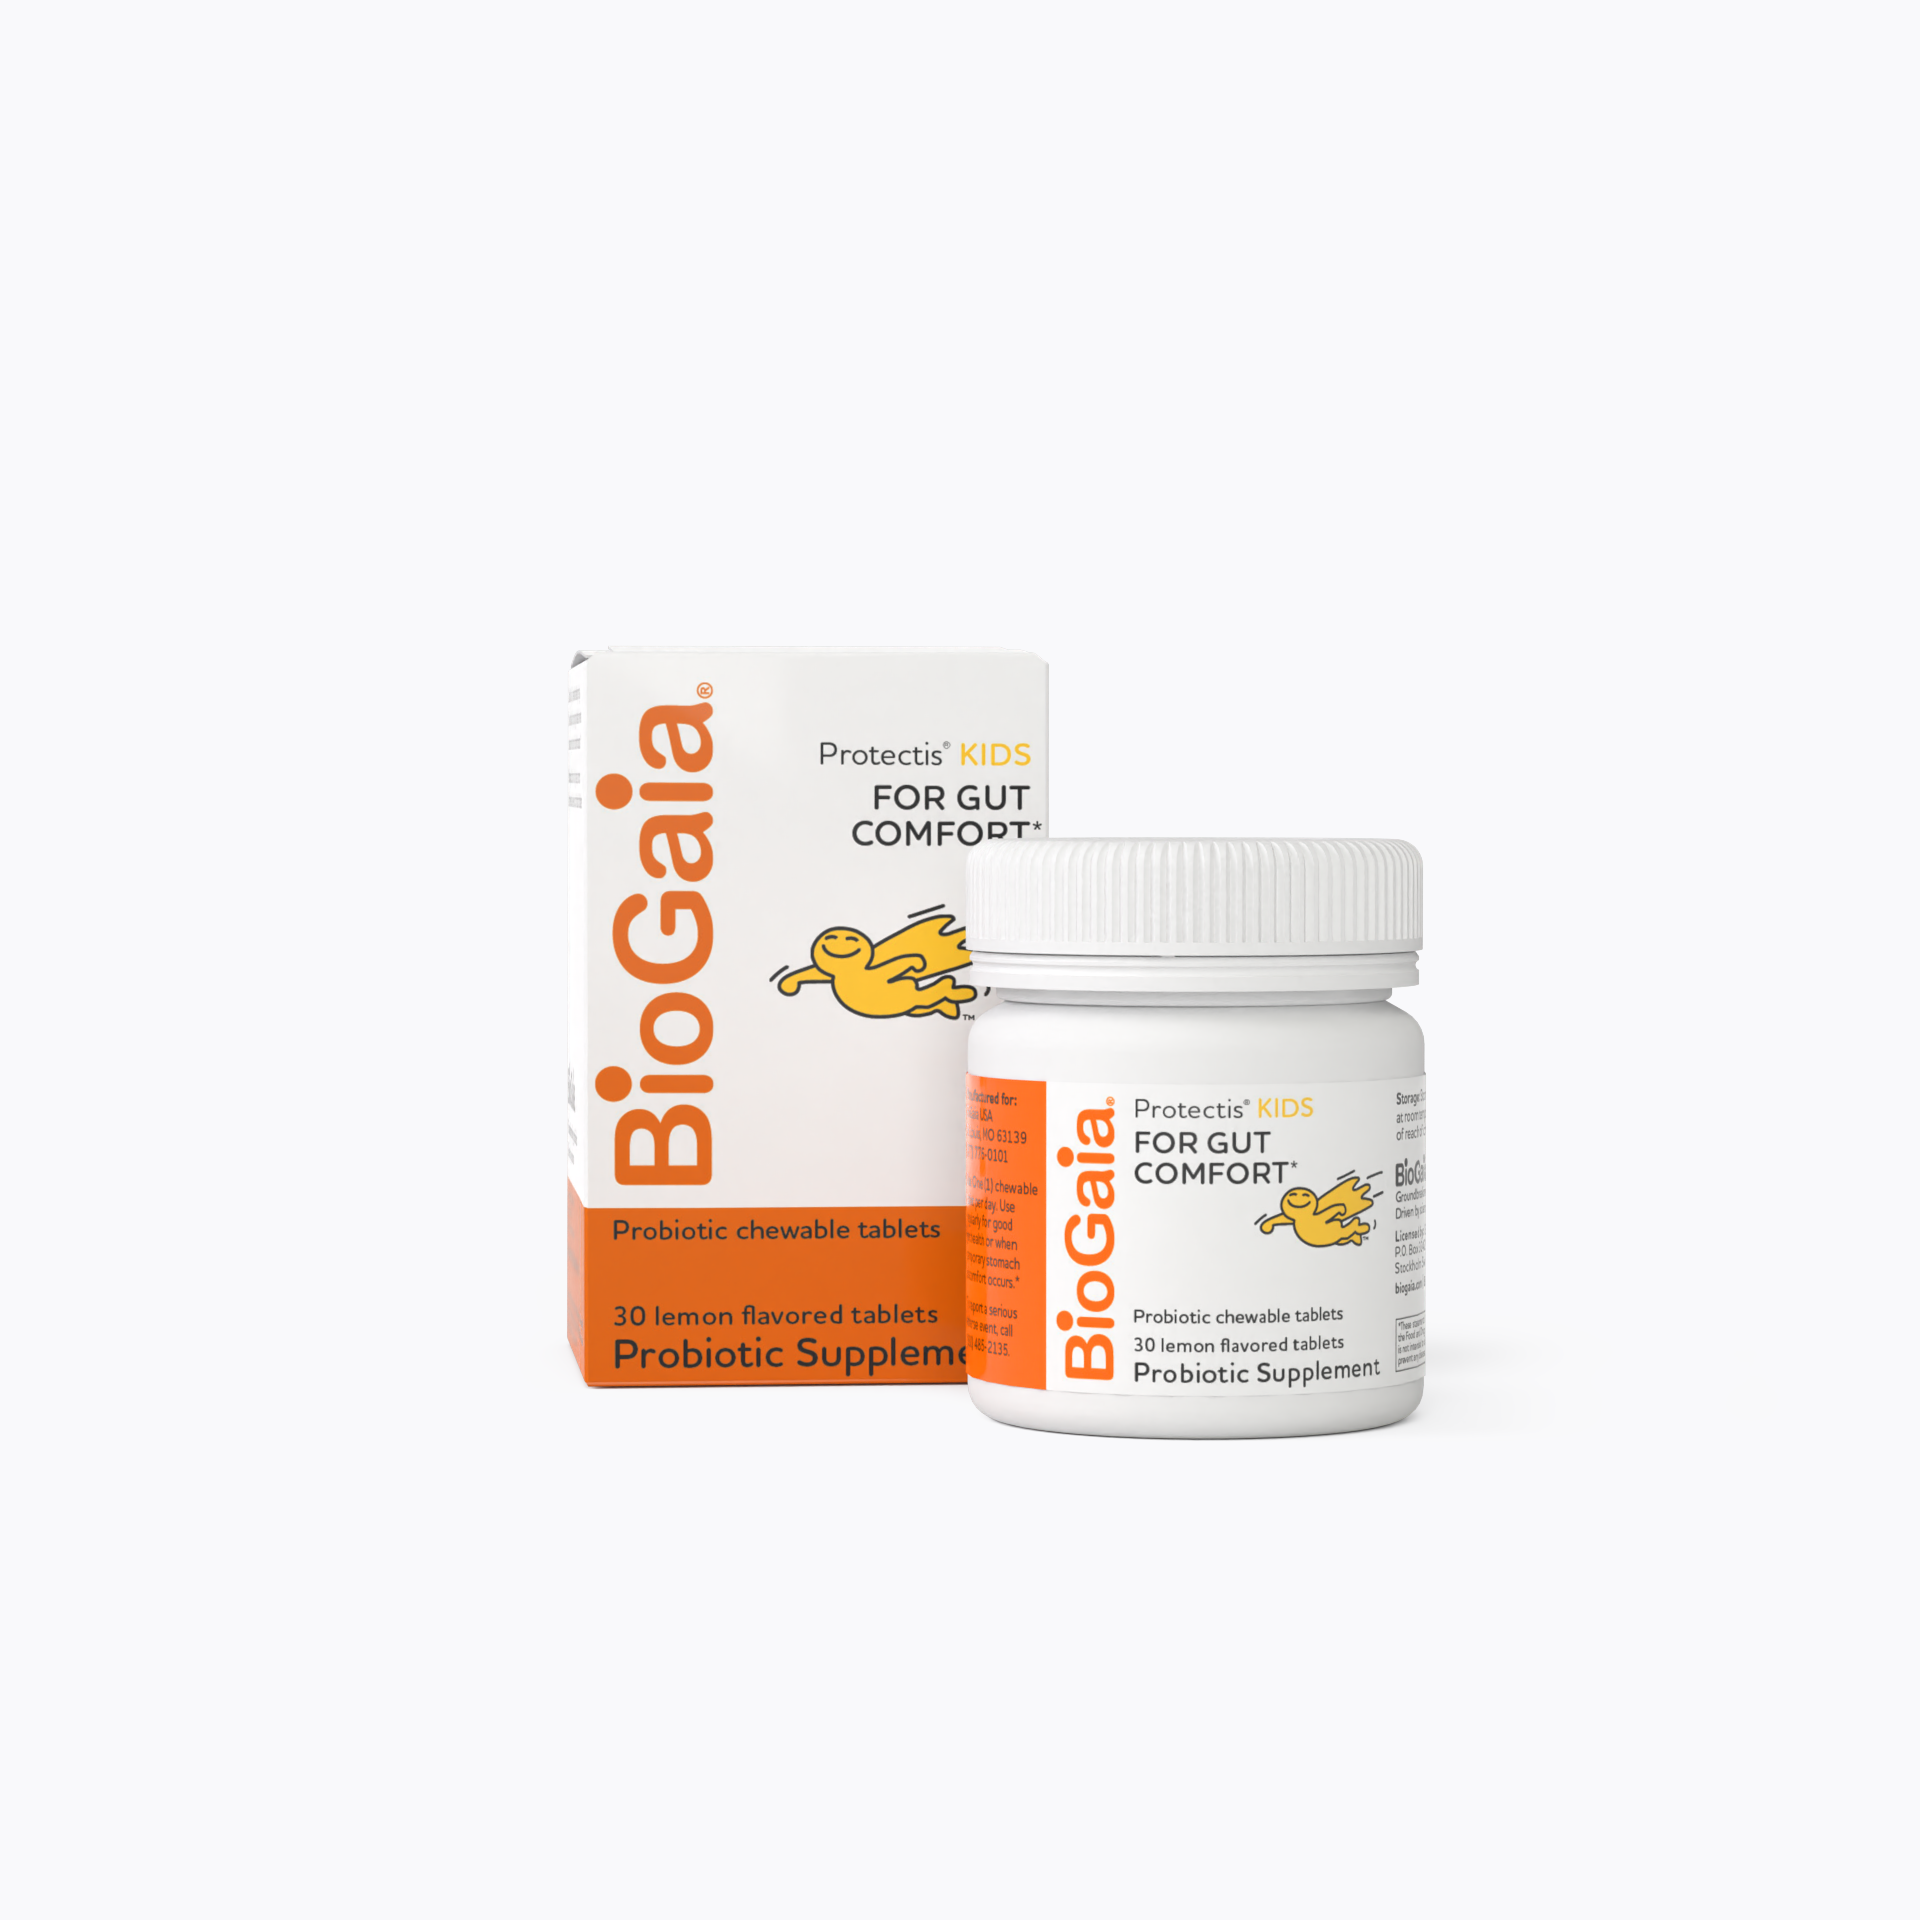 BioGaia Protectis Kids - Probiotic for kids for a health microbiome